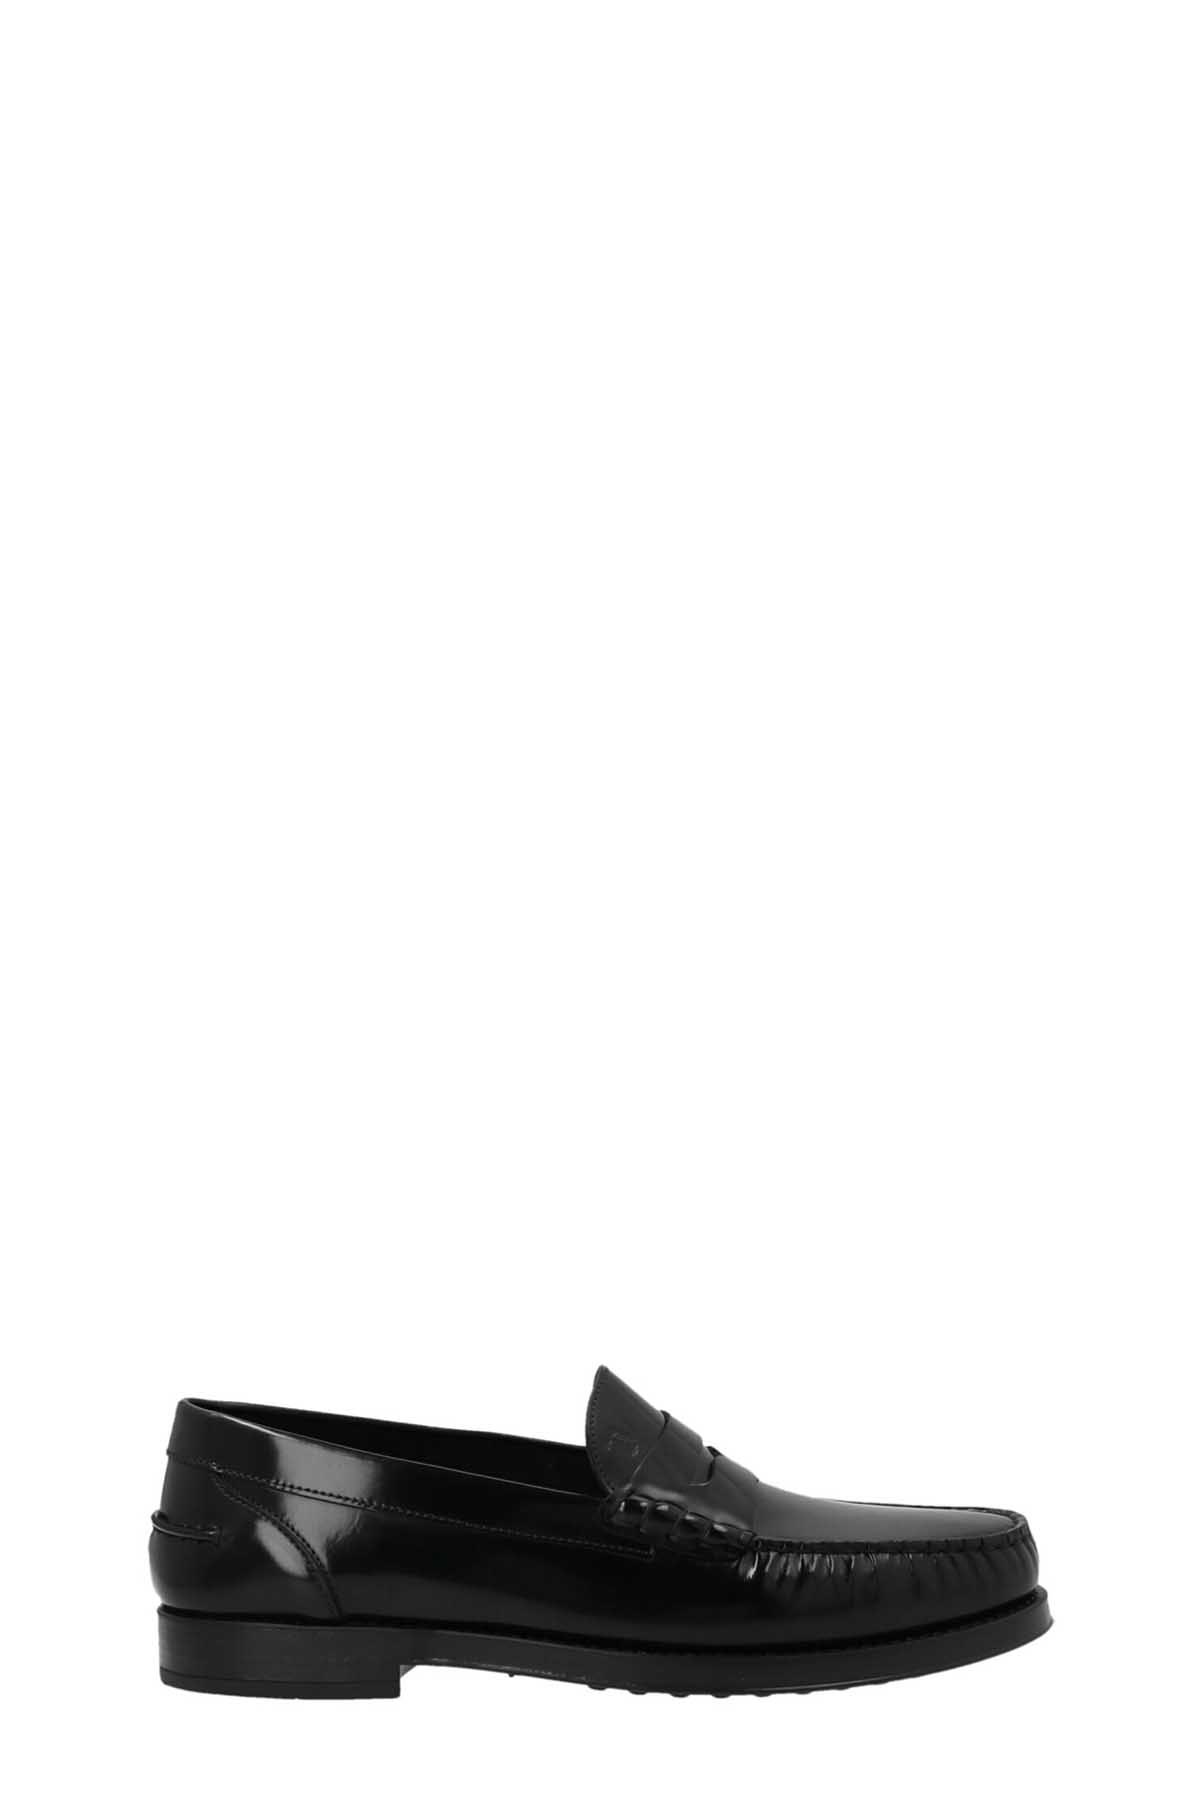 TOD'S 'College’ Loafers